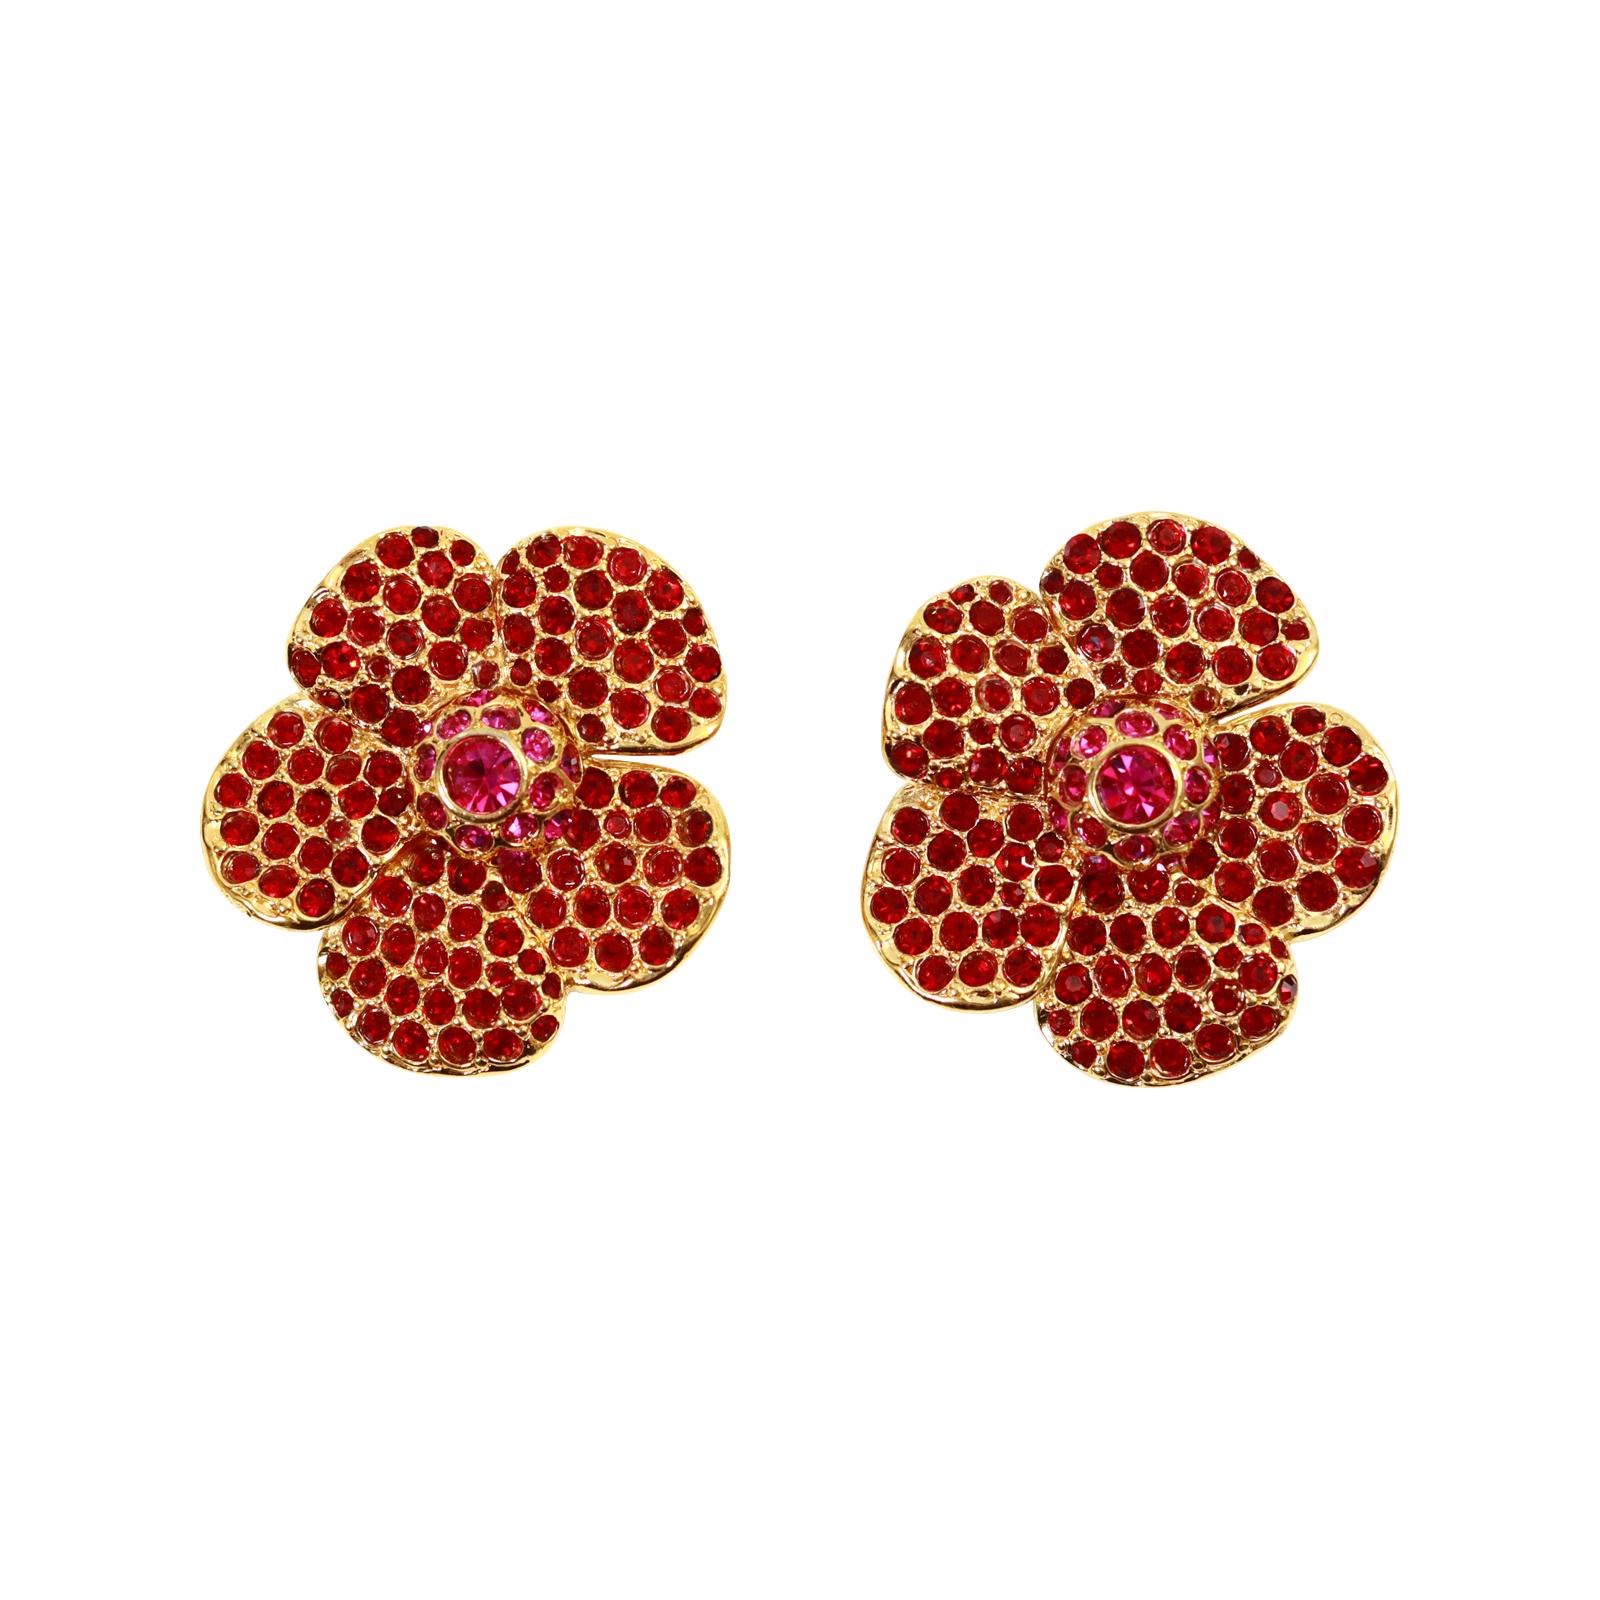 Vintage Yves Saint Laurent YSL Gold Pink and Red Flower Earrings Circa 1980's In Good Condition For Sale In New York, NY